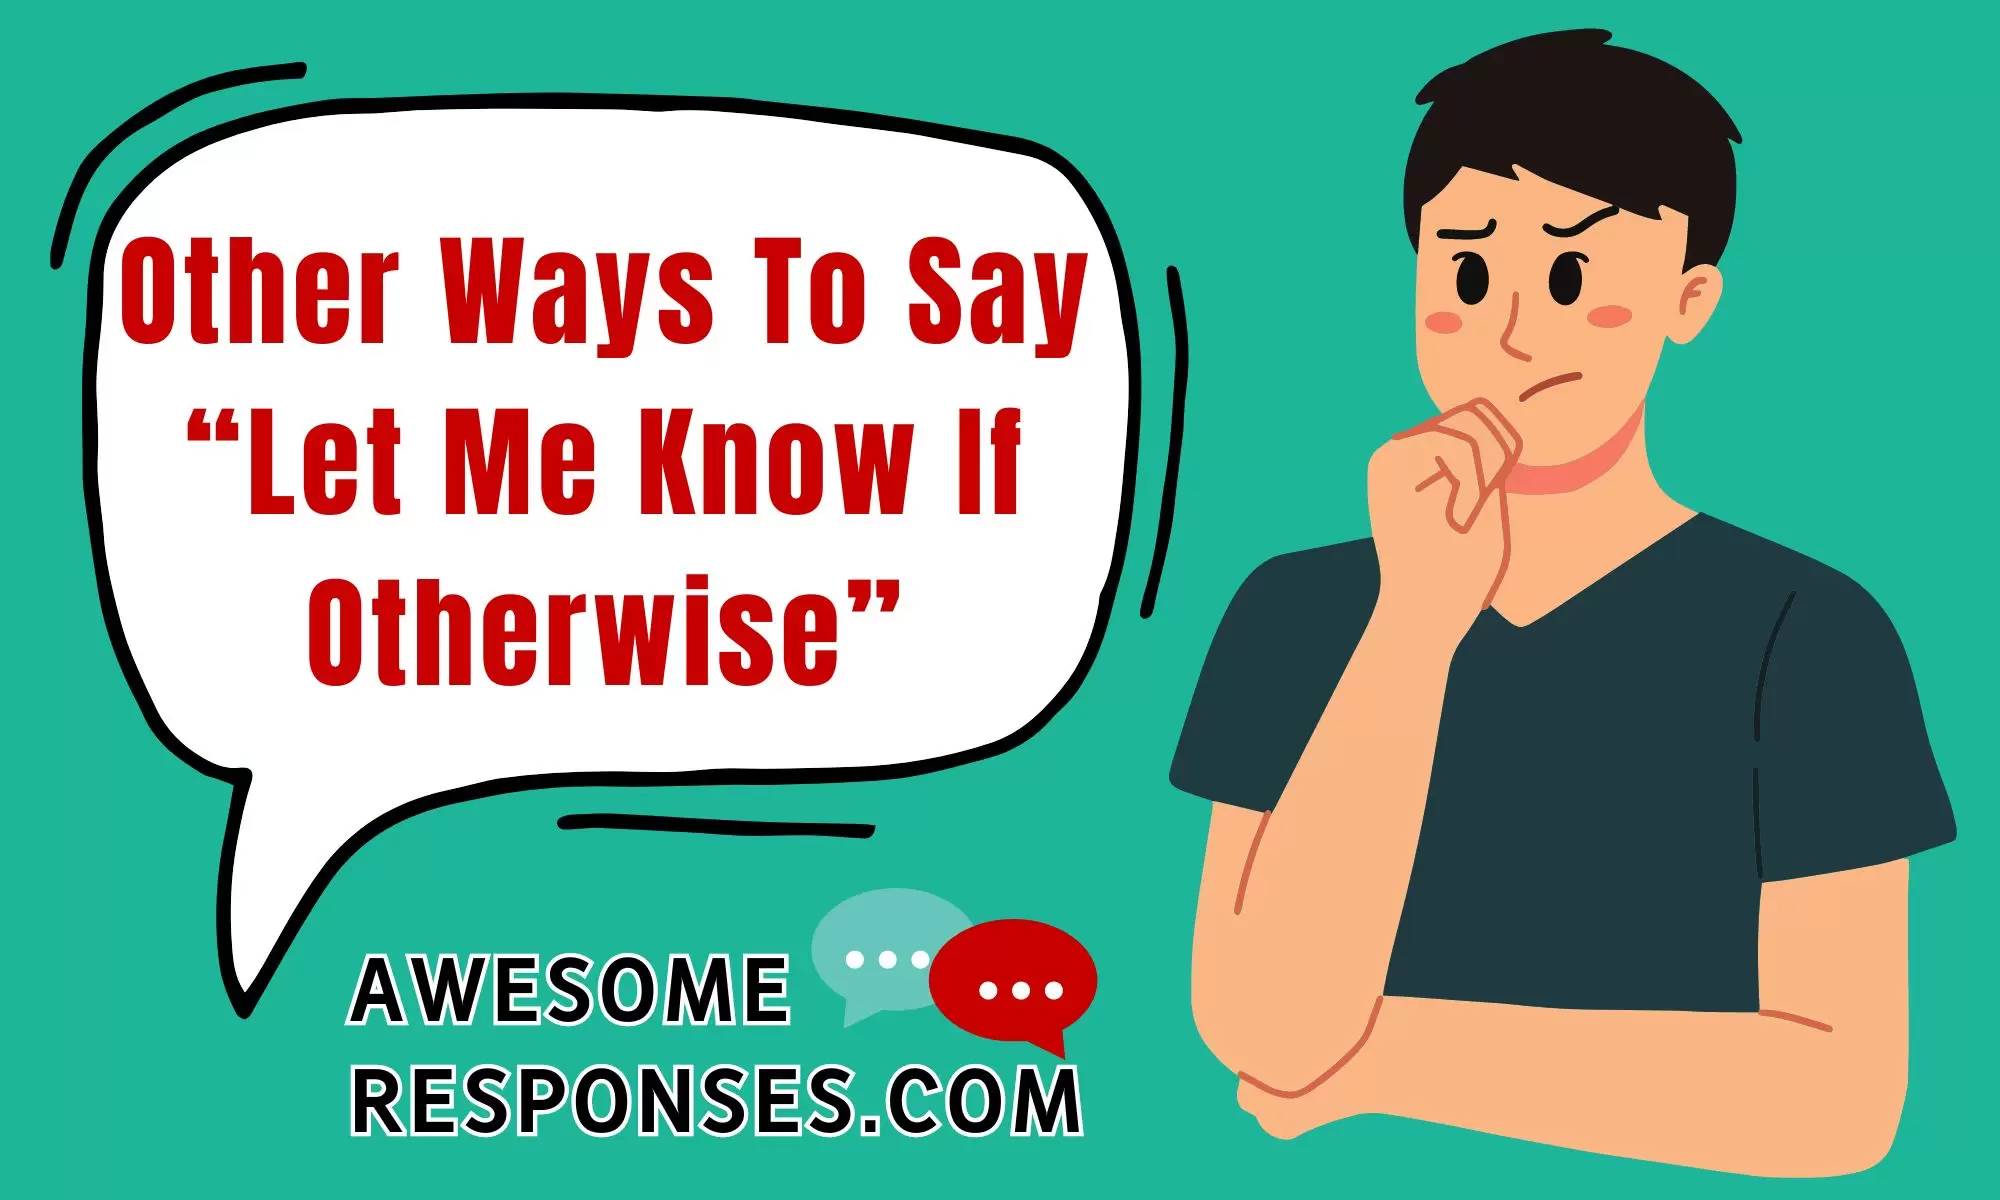 Other Ways To Say “Let Me Know If Otherwise”